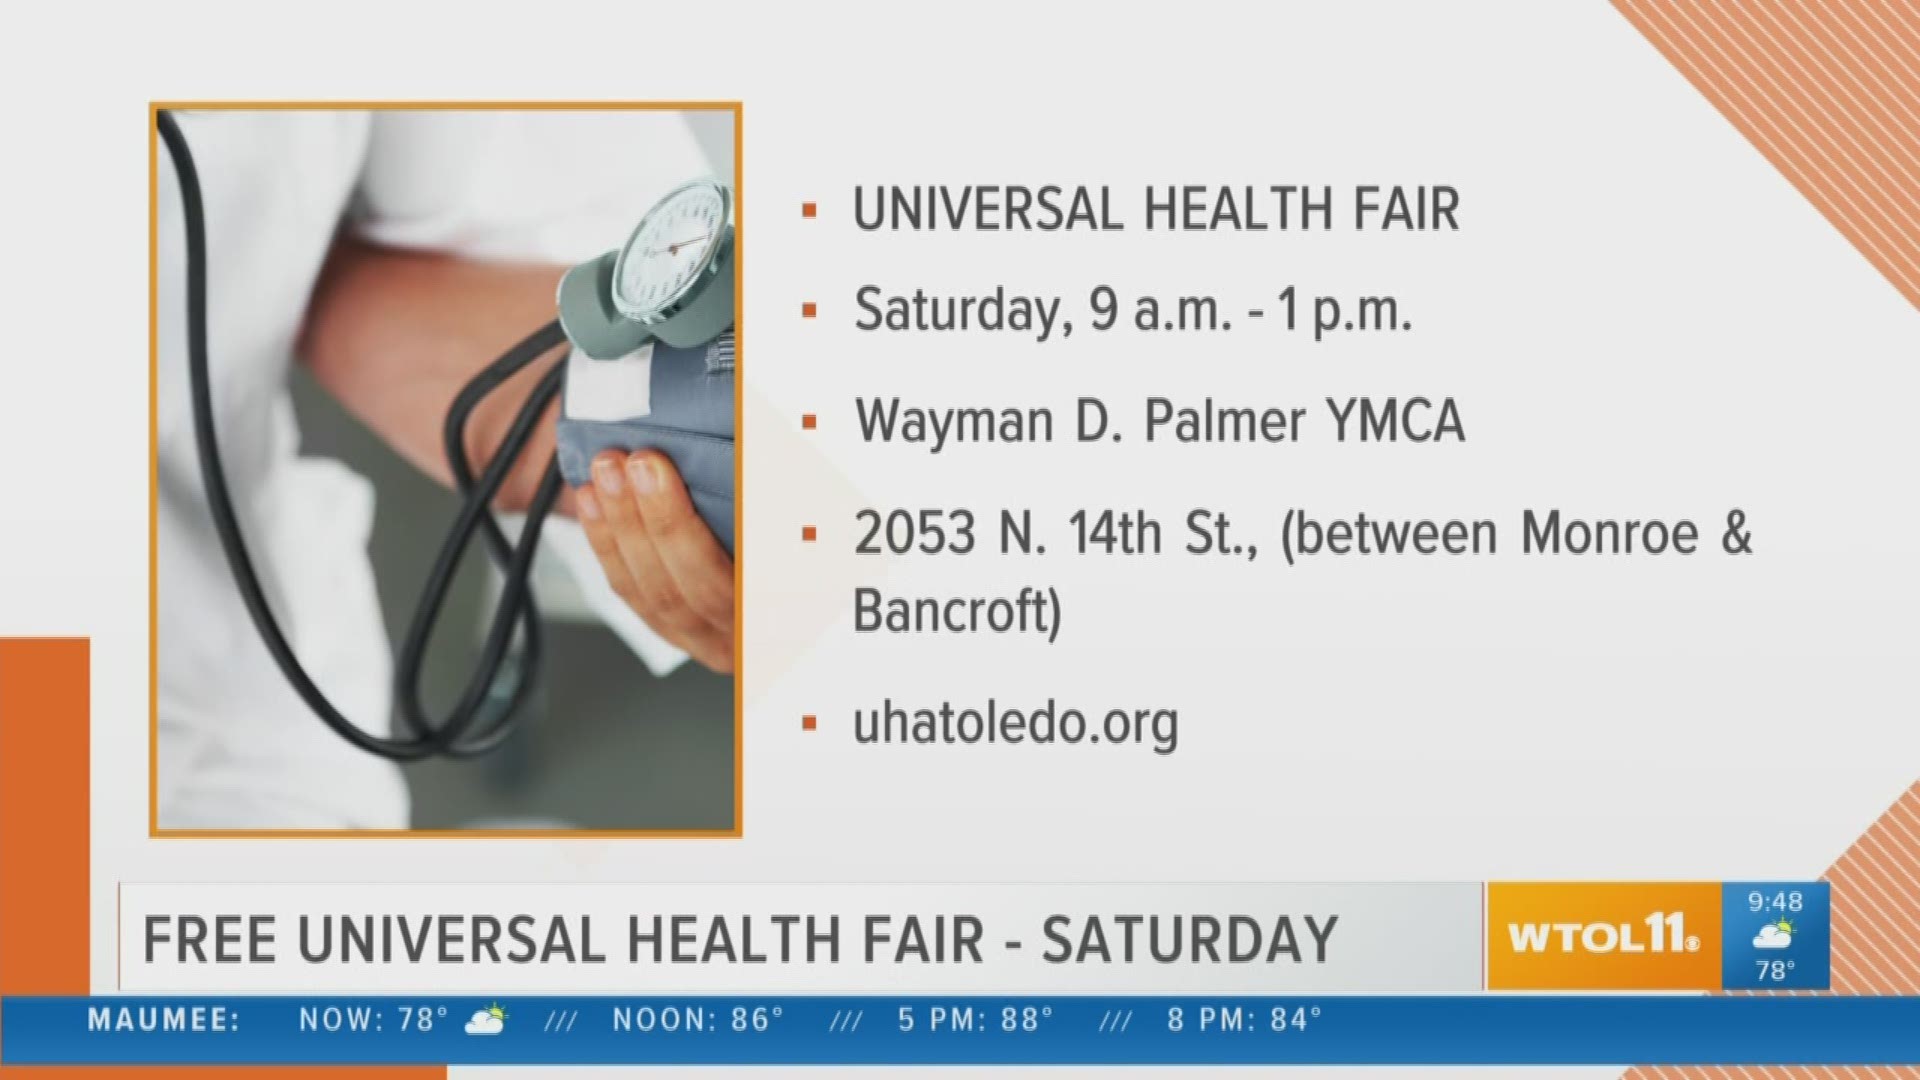 Check out the free Universal Health Fair this Saturday.